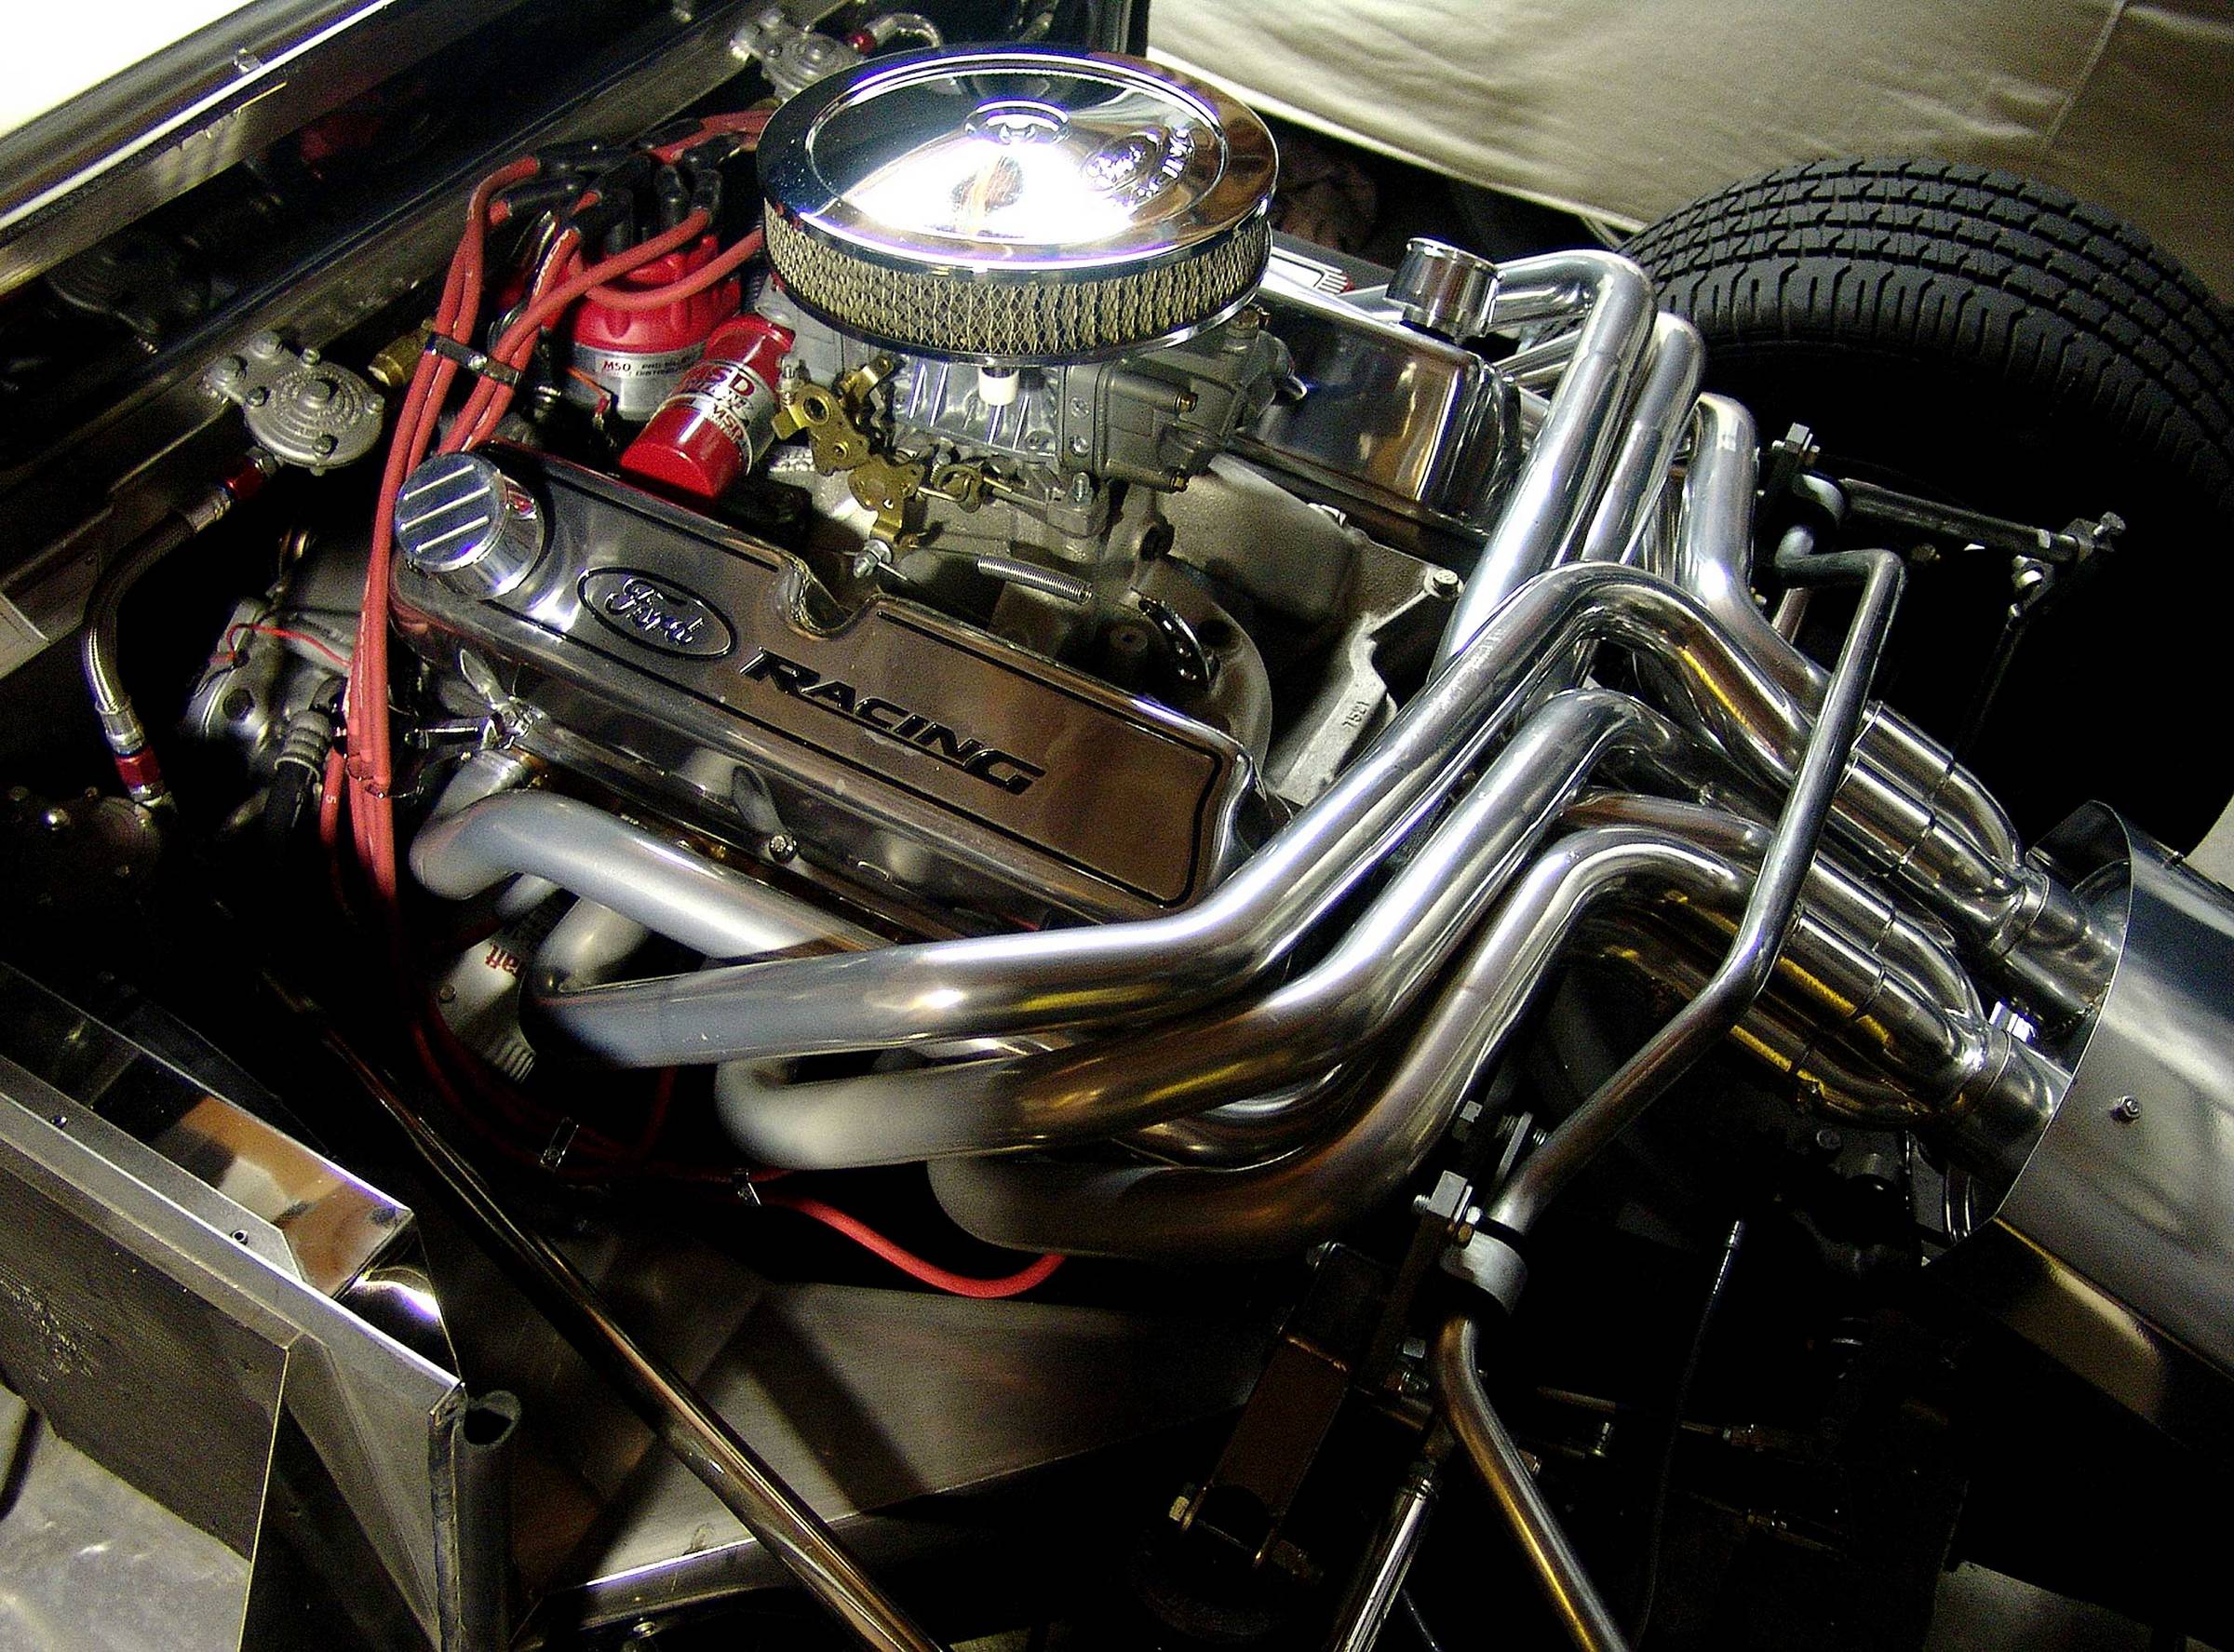 66Ford-engine2